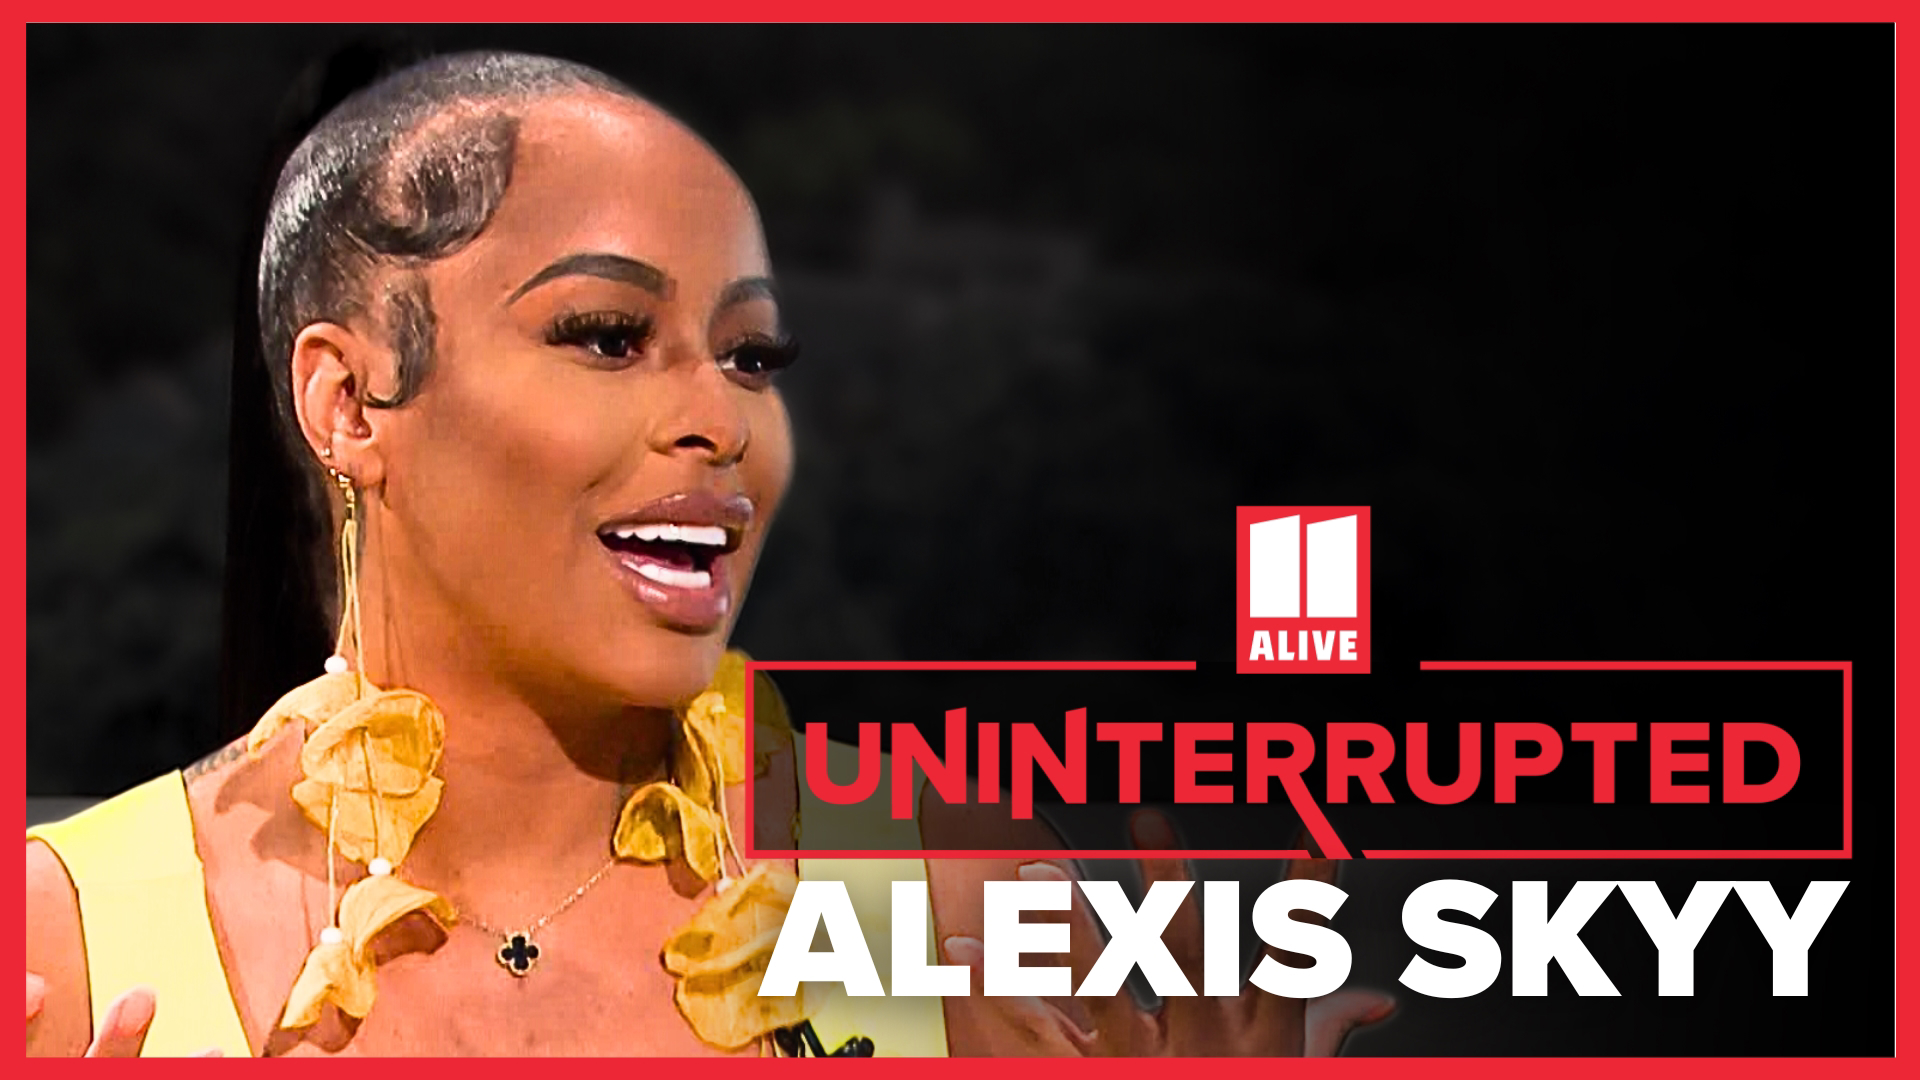 Atlanta's own Alexis Skyy rose to fame after starring in VH1's Love and Hip-Hop.